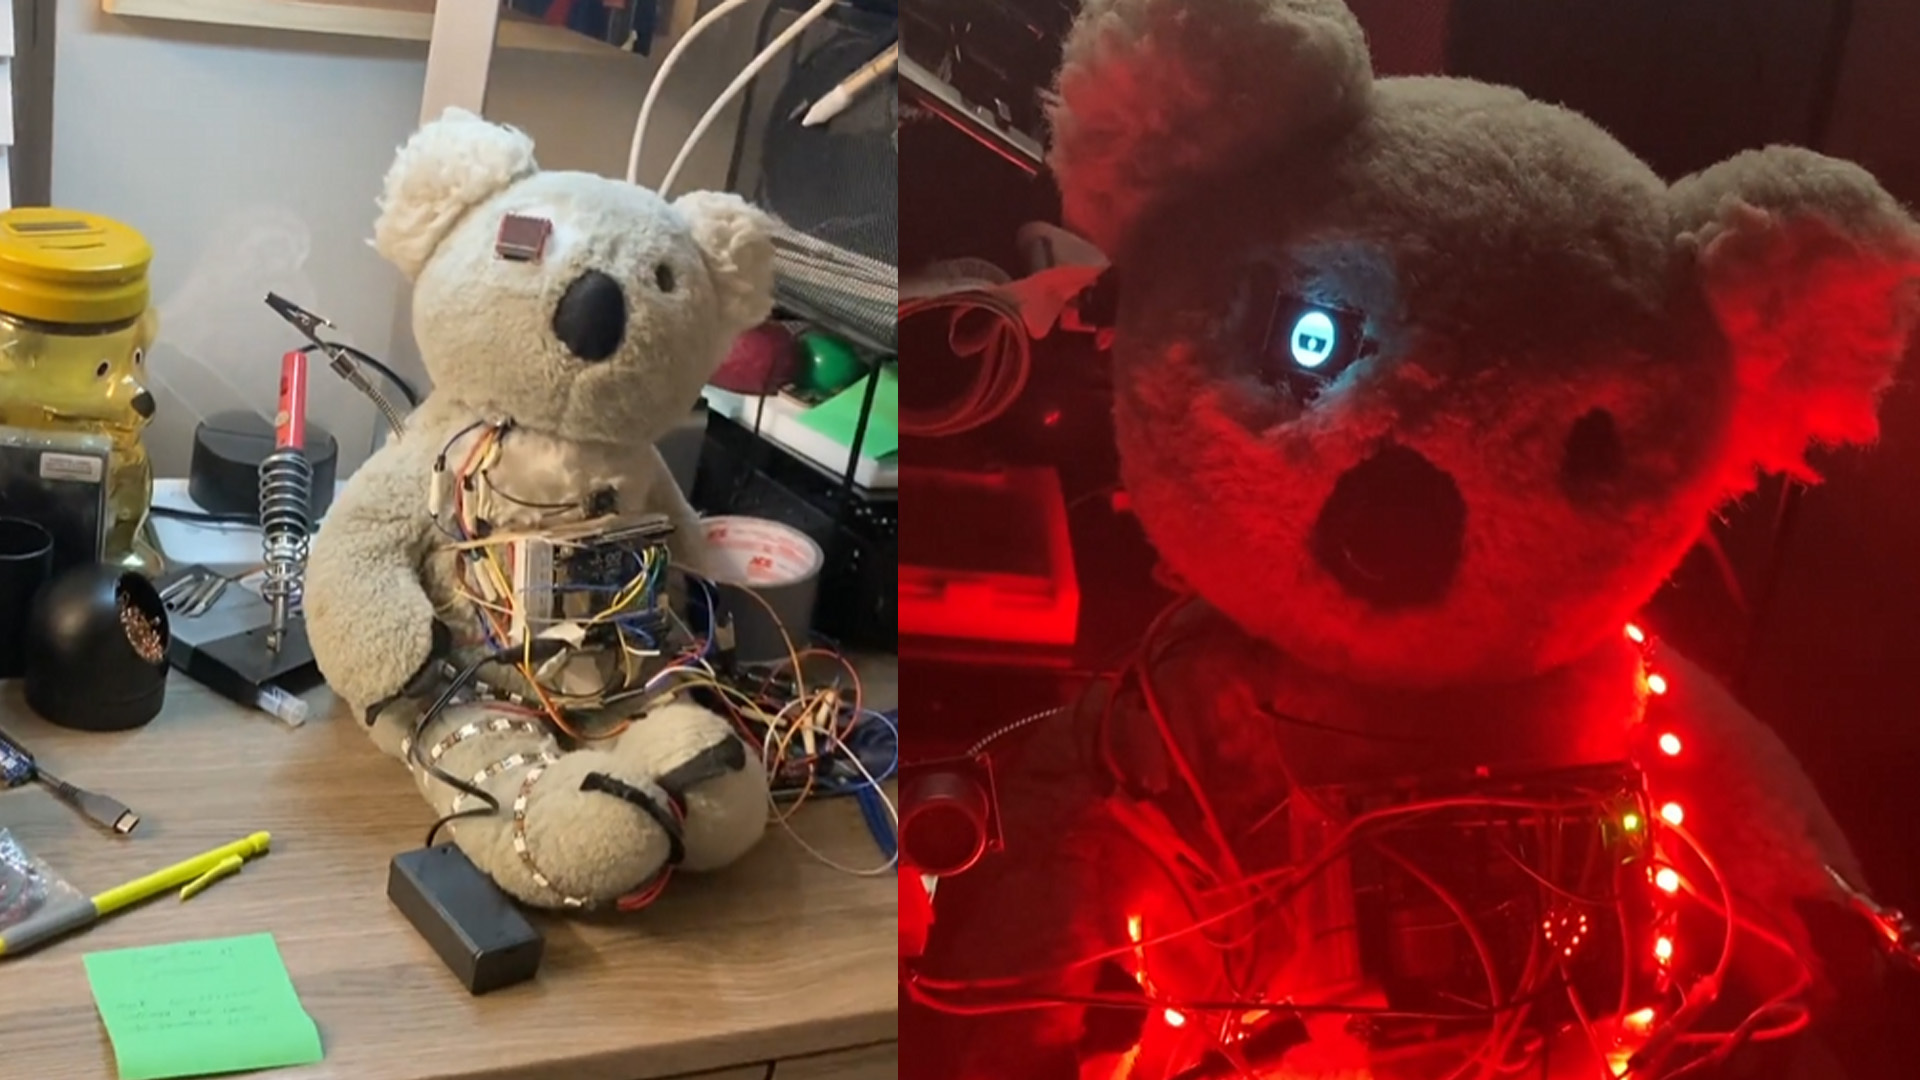  This ChatGPT-powered robot koala bear is giving me serious Five Nights at Freddy's vibes 